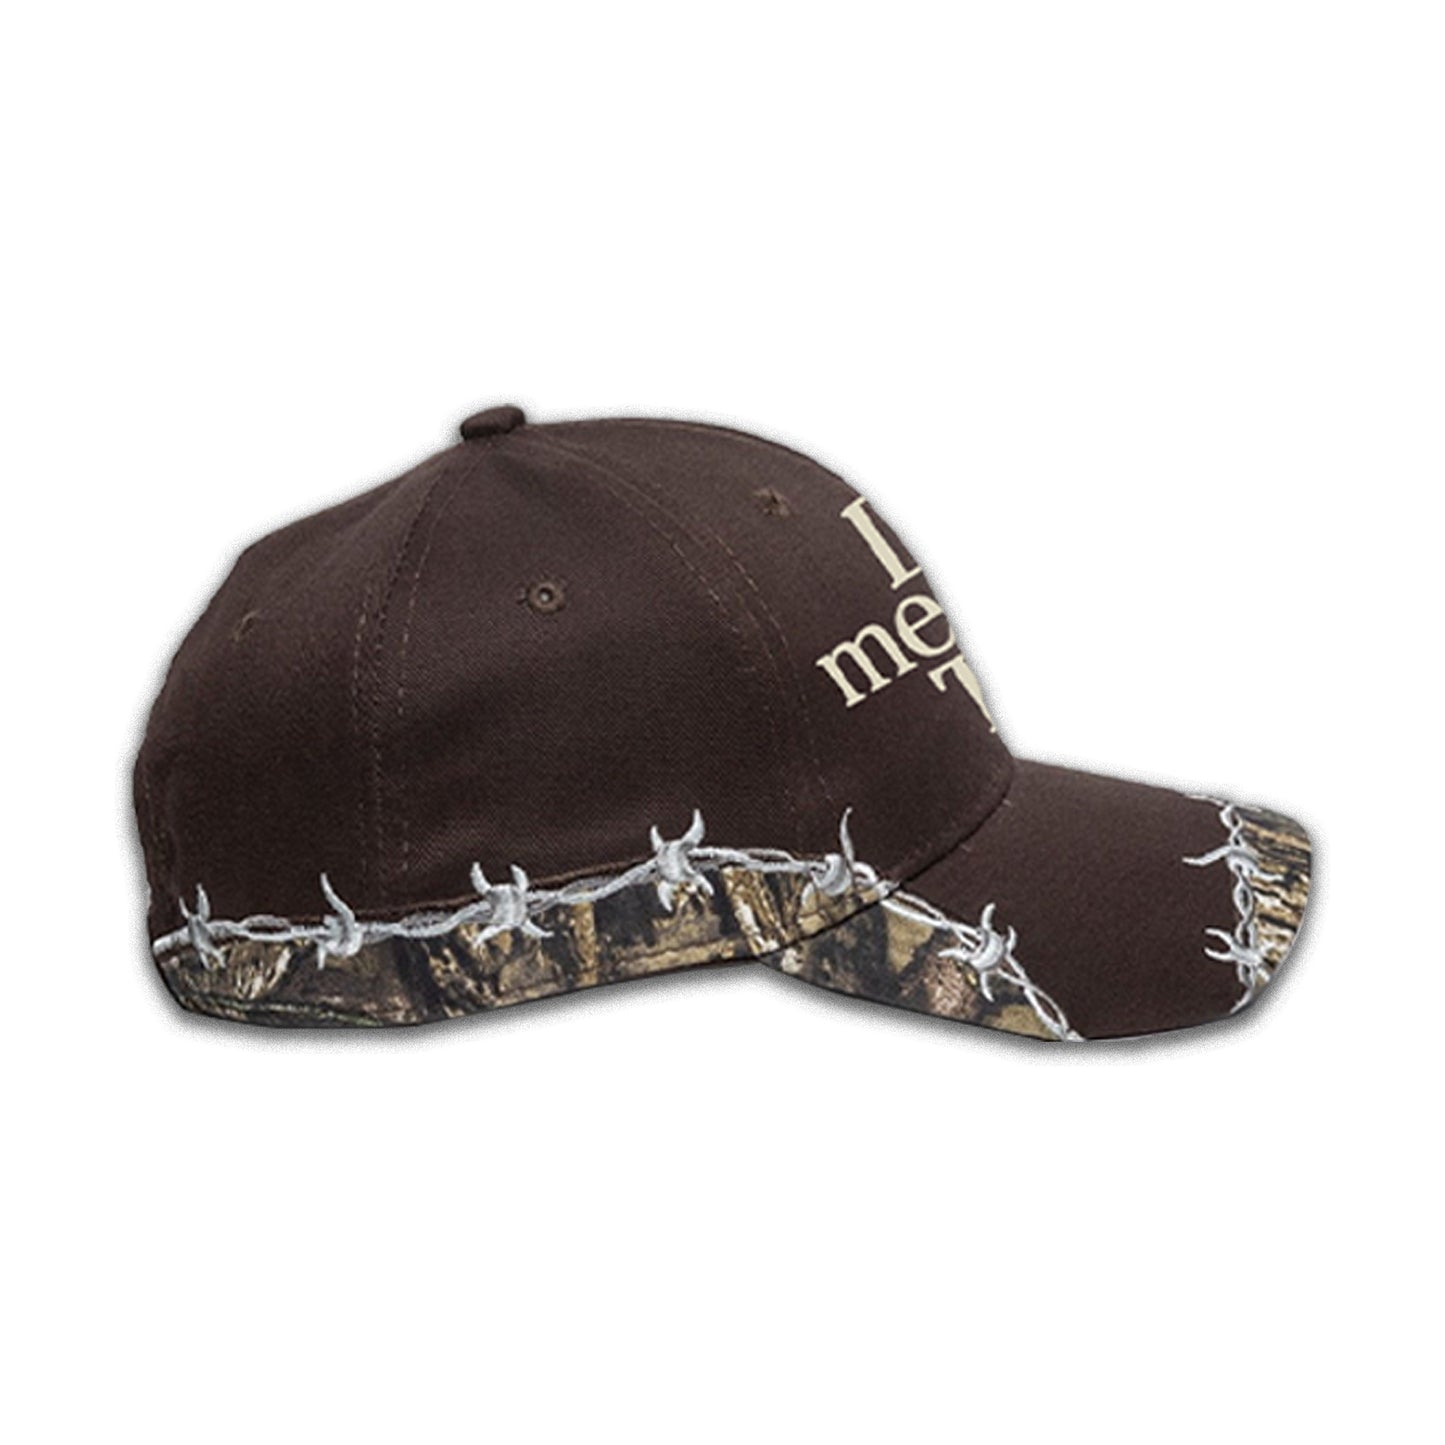 DMWT Barbed Wire Hat